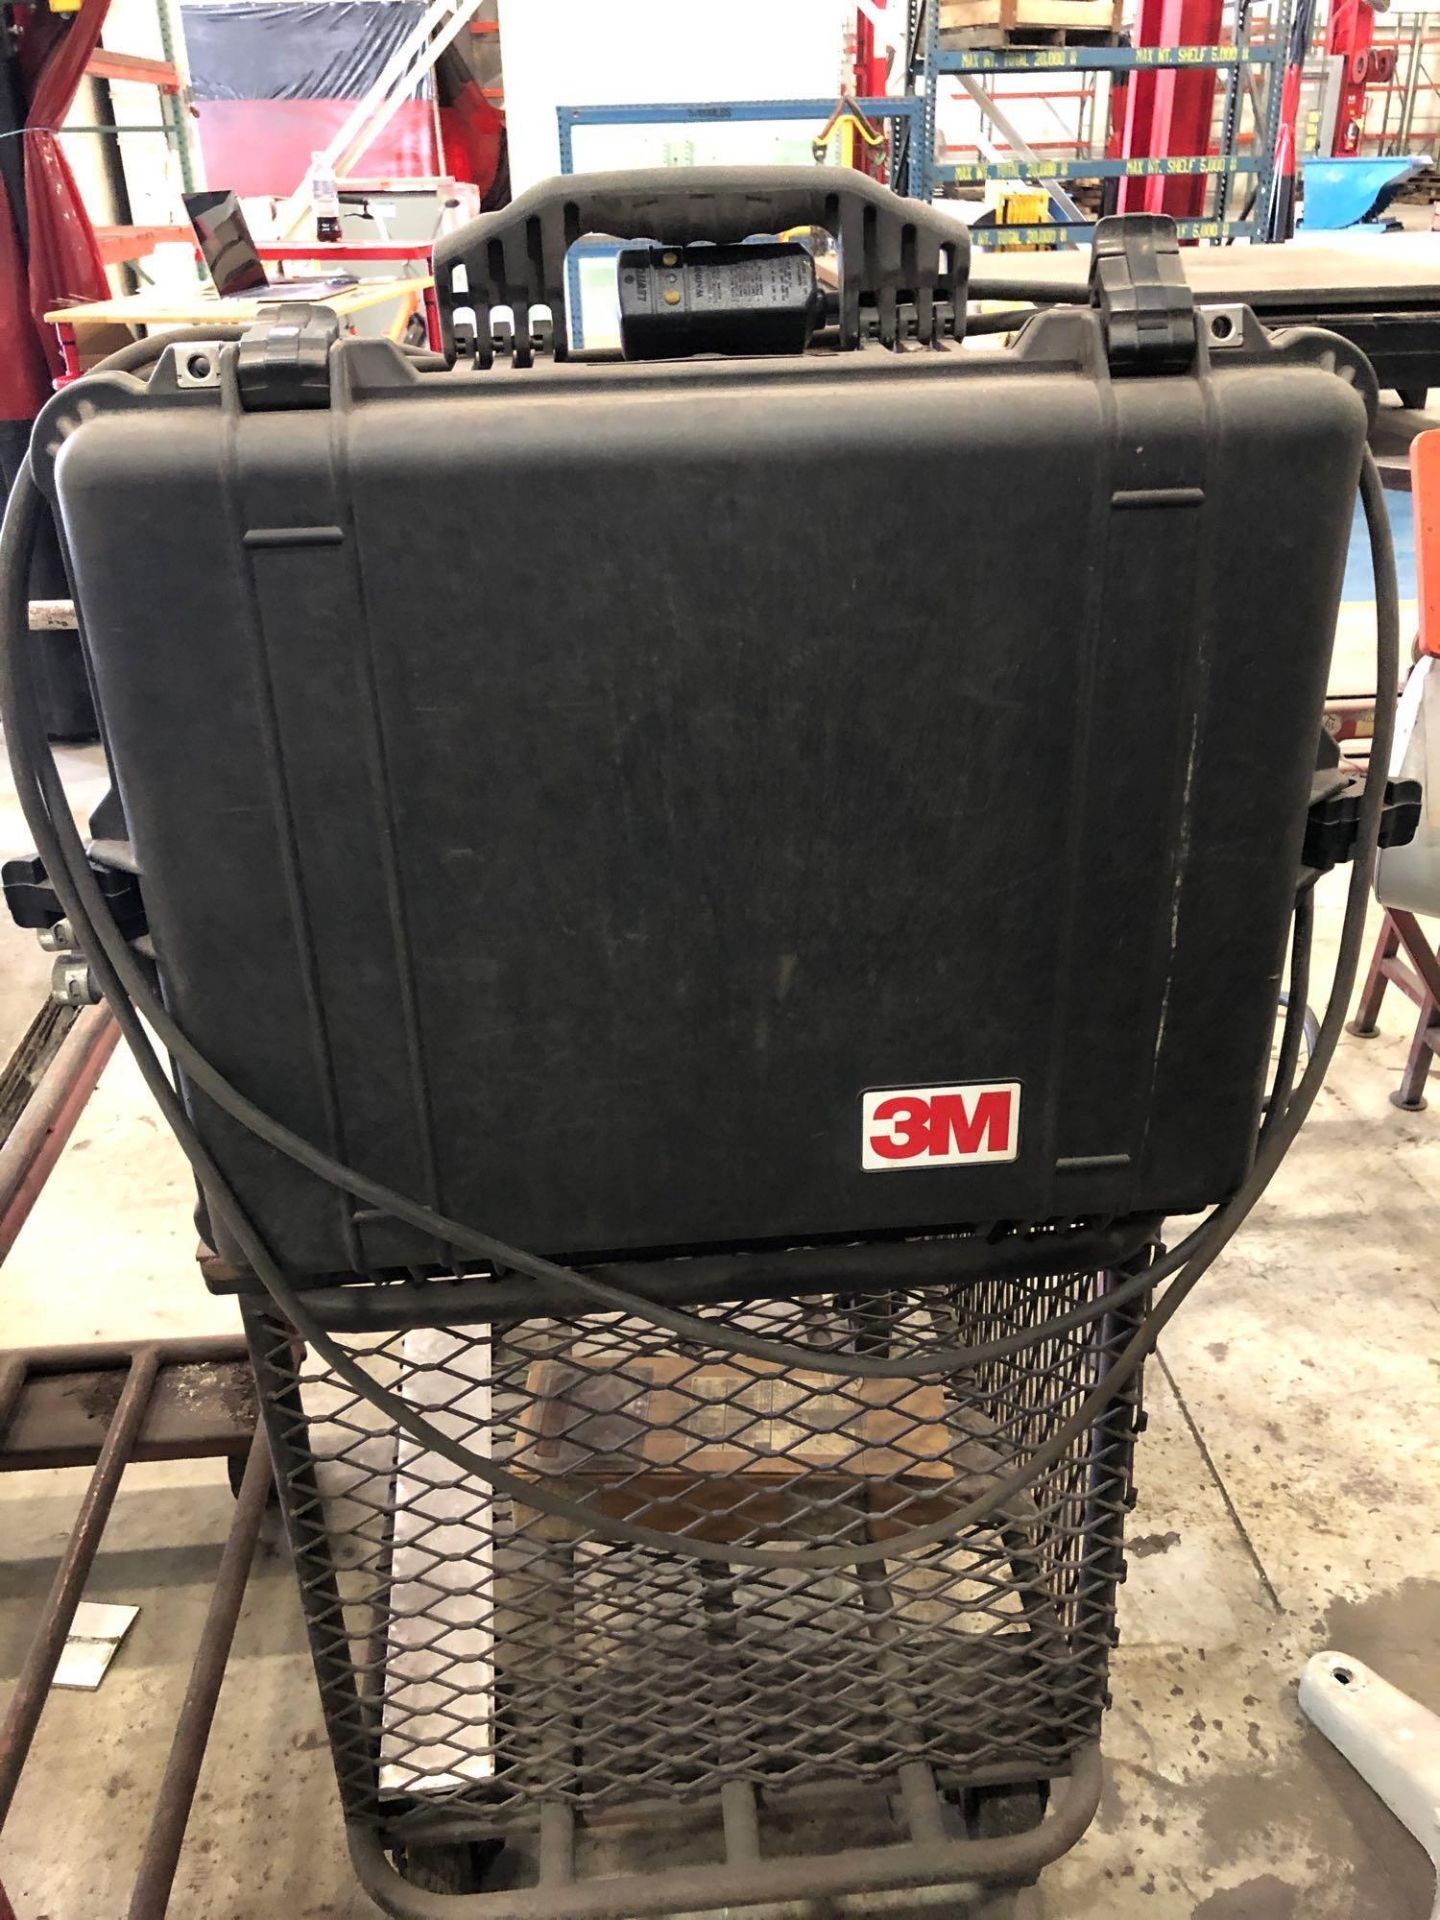 Steel Roll Around Cart w/ 3M Model: 5700 Co Monitor Air Purification System - Image 5 of 28